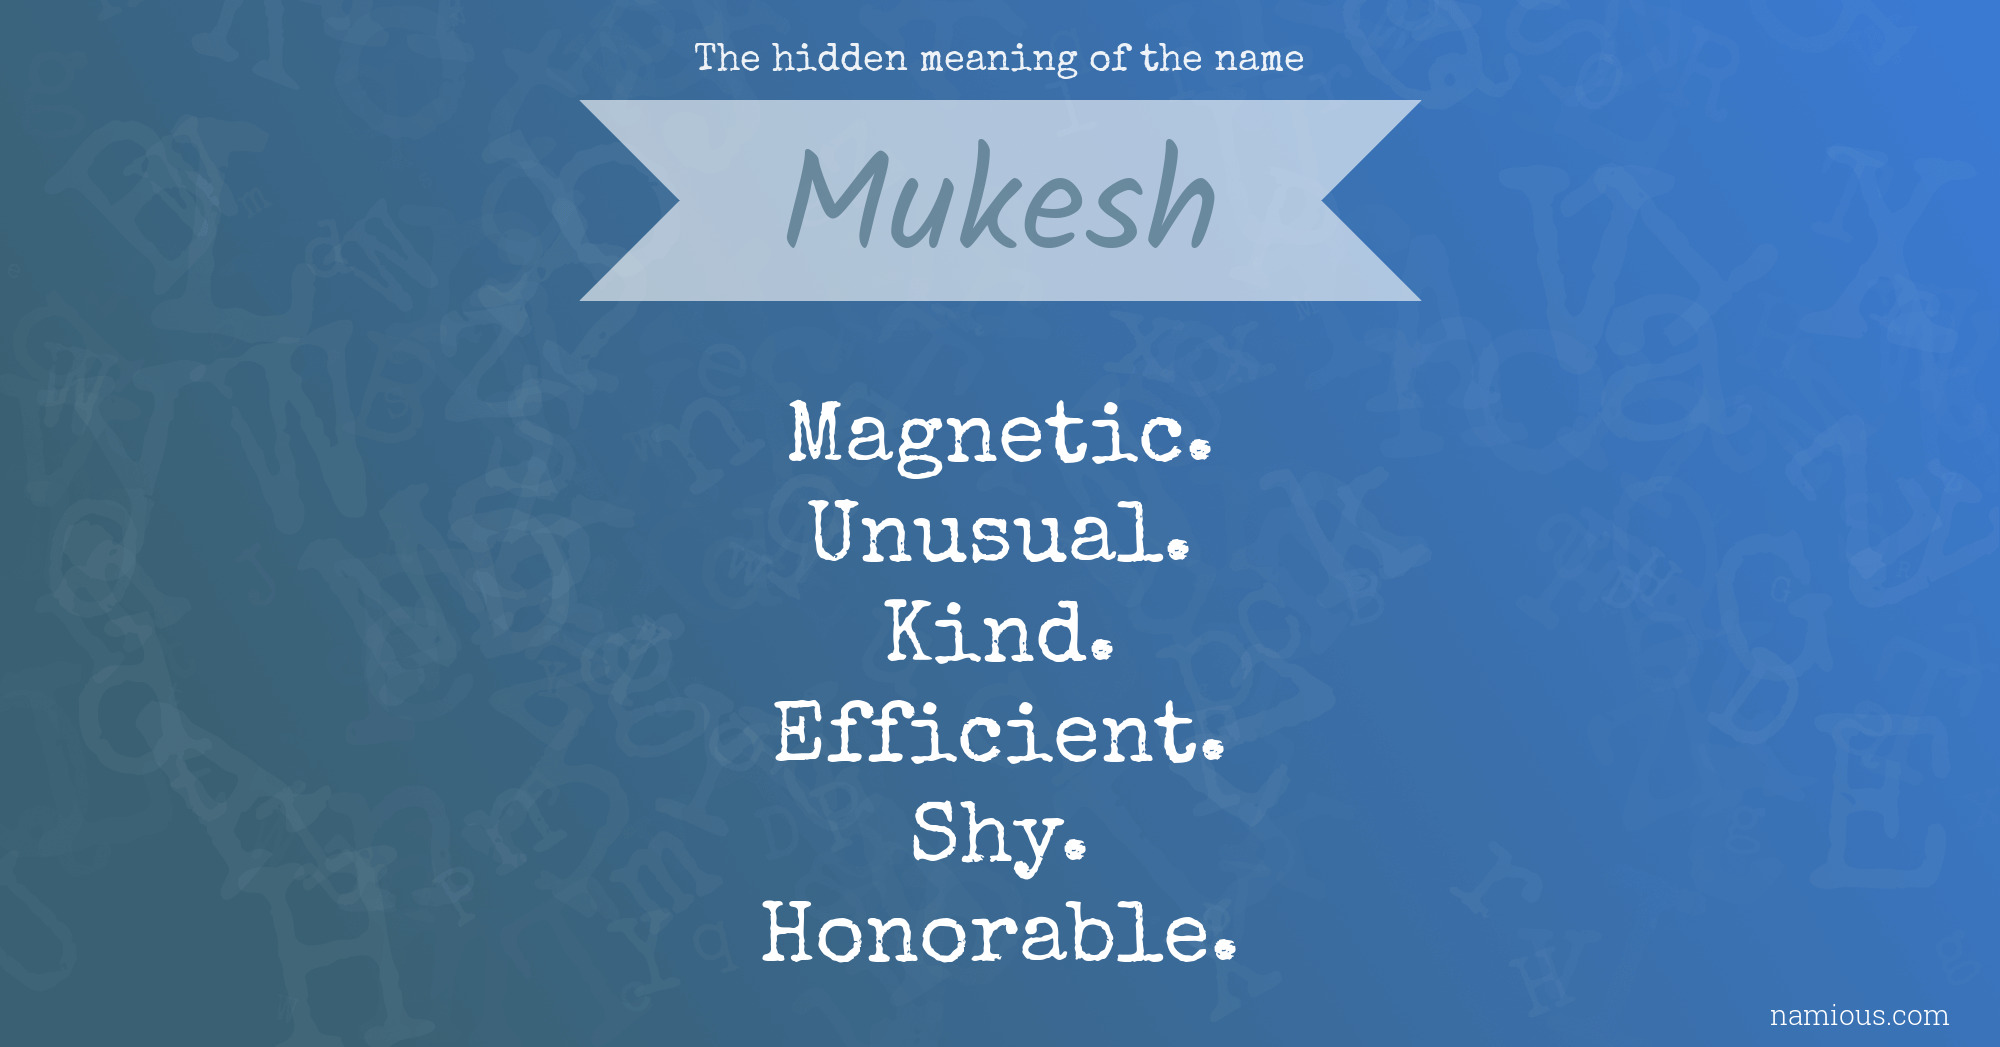 The hidden meaning of the name Mukesh